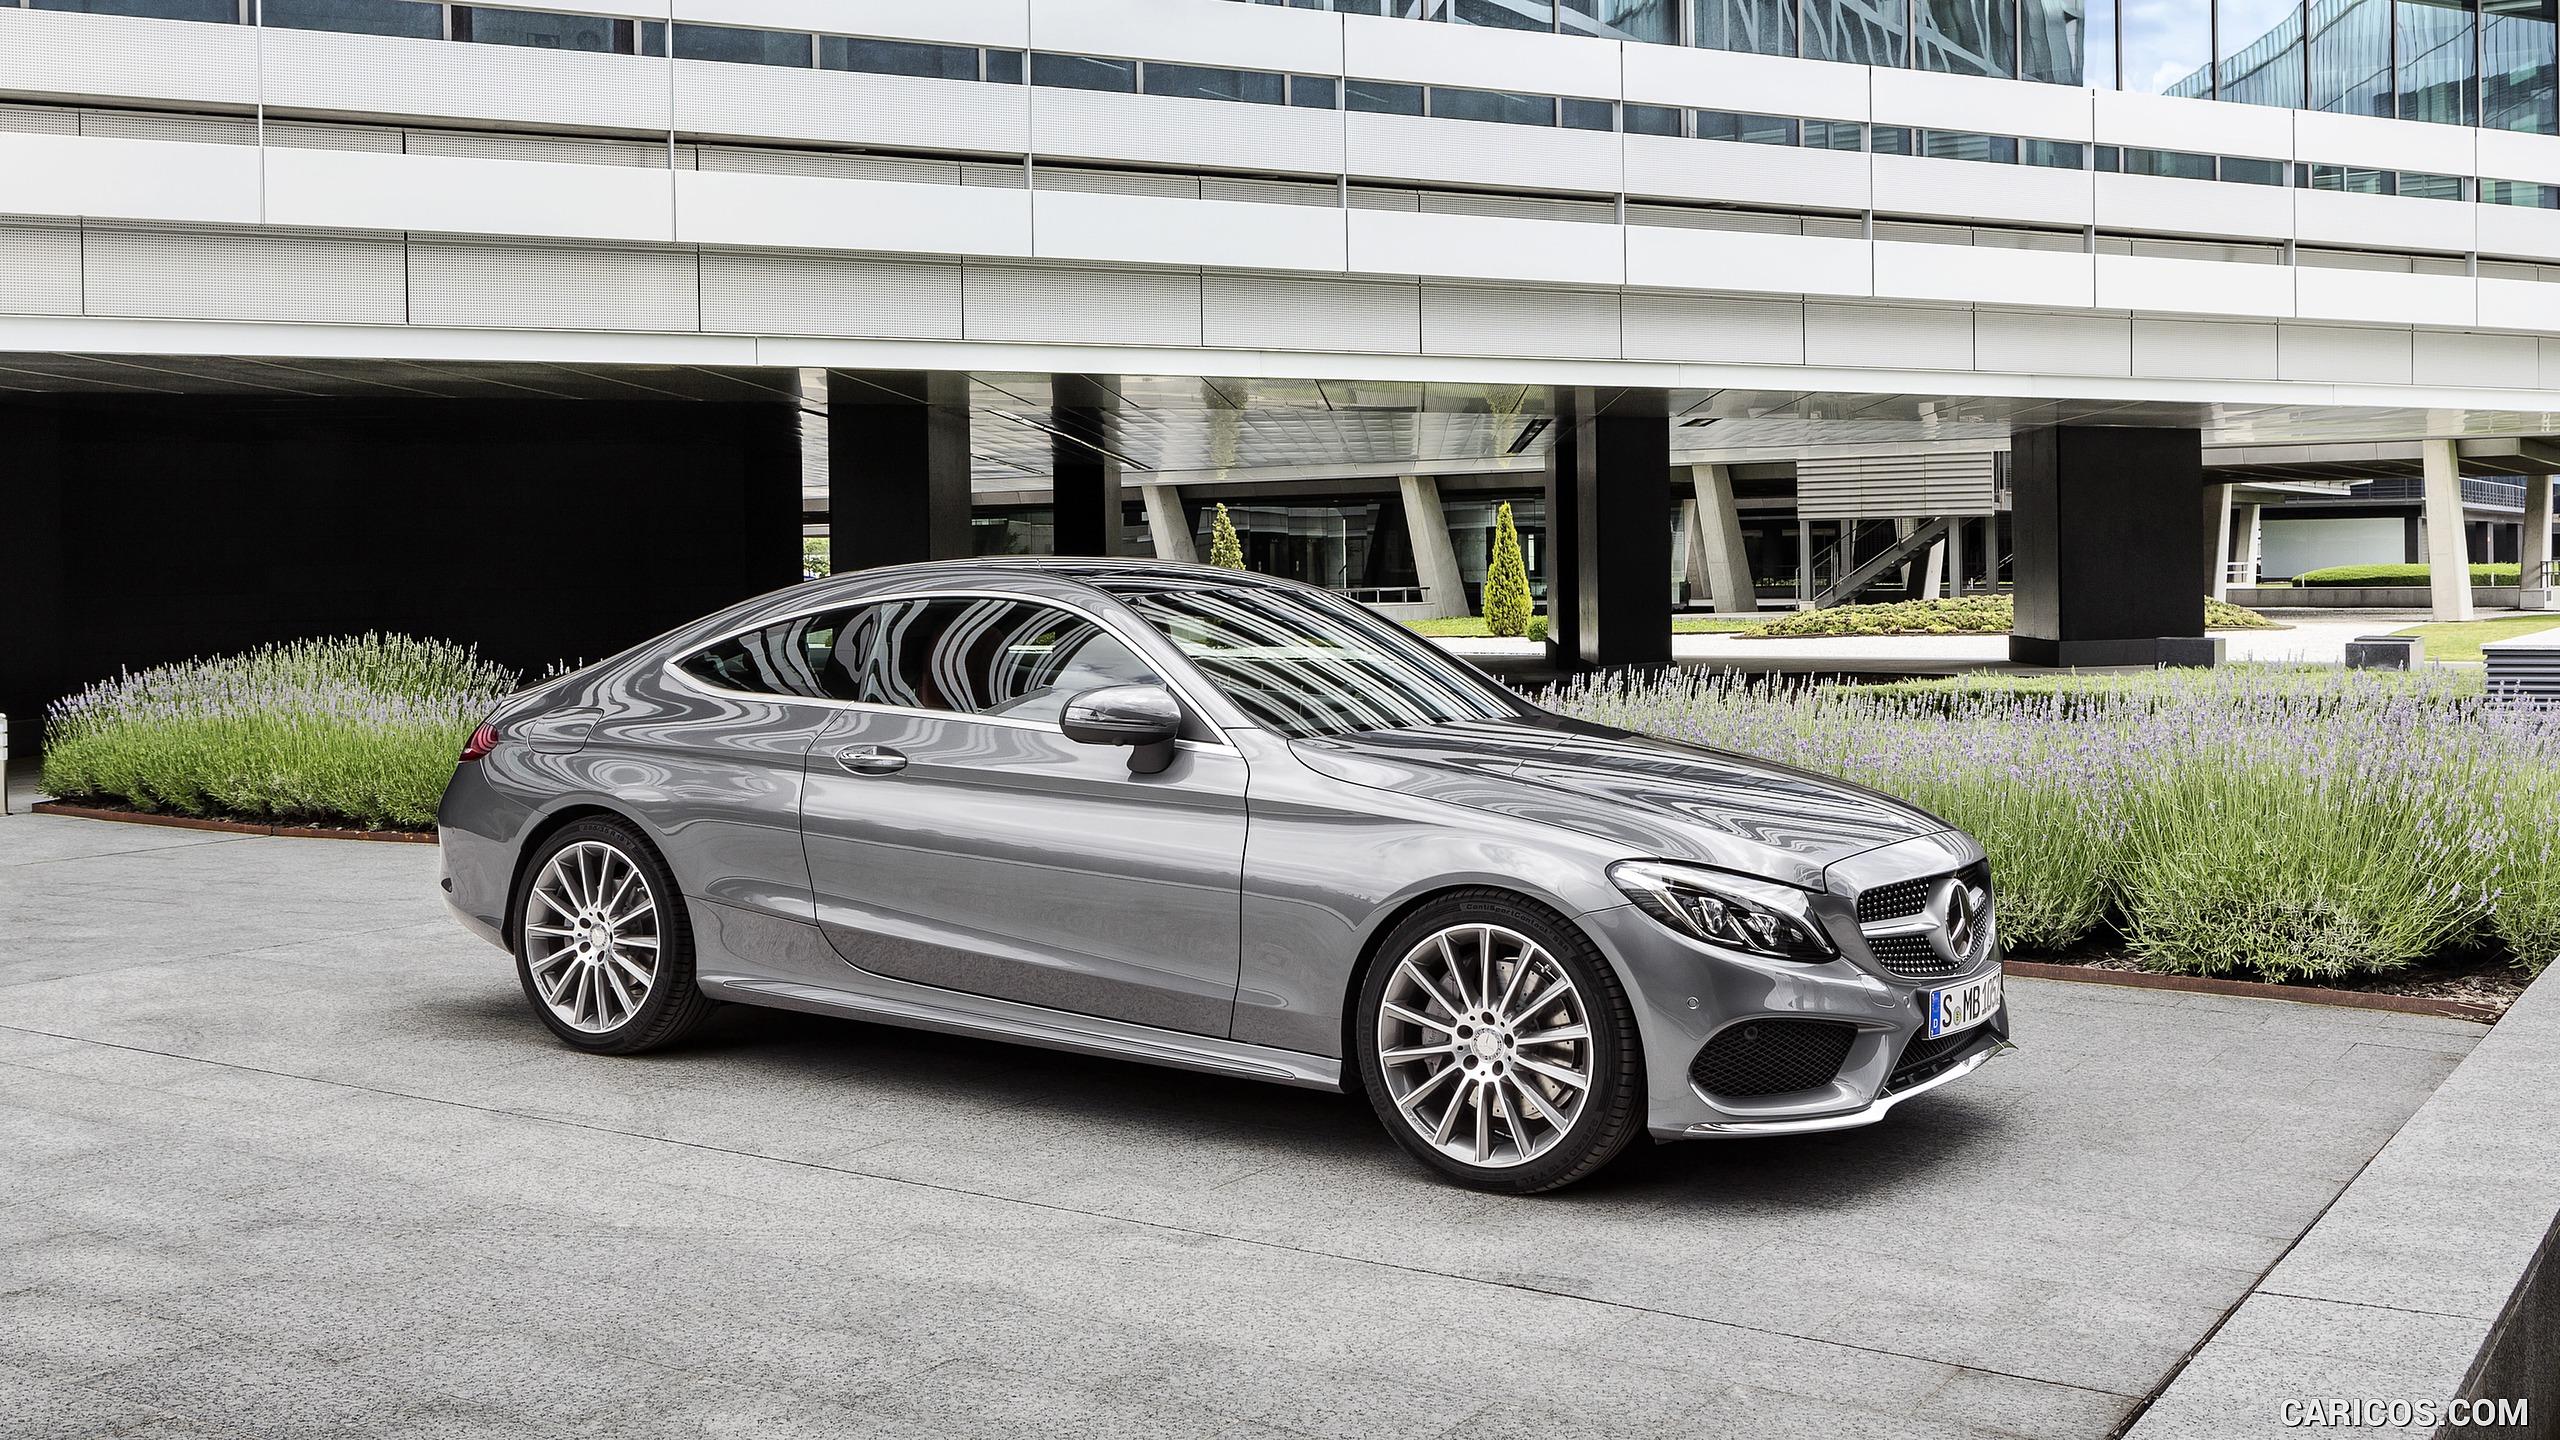 2017 Mercedes-Benz C-Class Coupe C300 (Selenit Grey) - Side, #50 of 210